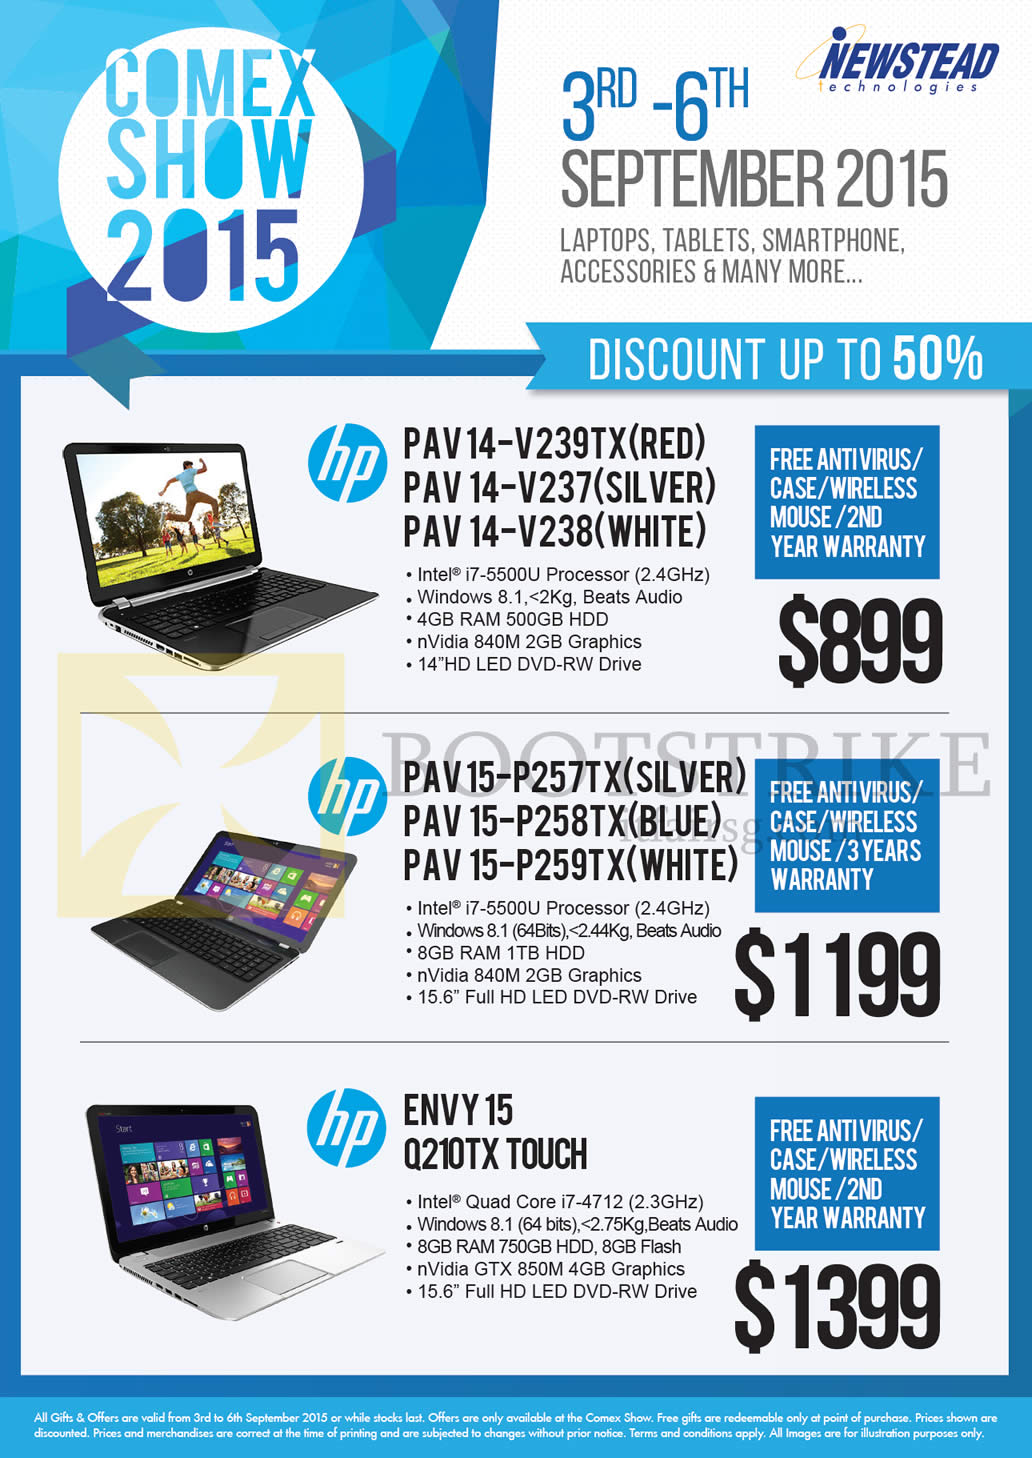 COMEX 2015 price list image brochure of HP Newstead Notebooks PAV14 V239TX V237 V238, PAV15 P257TX P258TX P259TX, Envy 15 Q210TX Touch